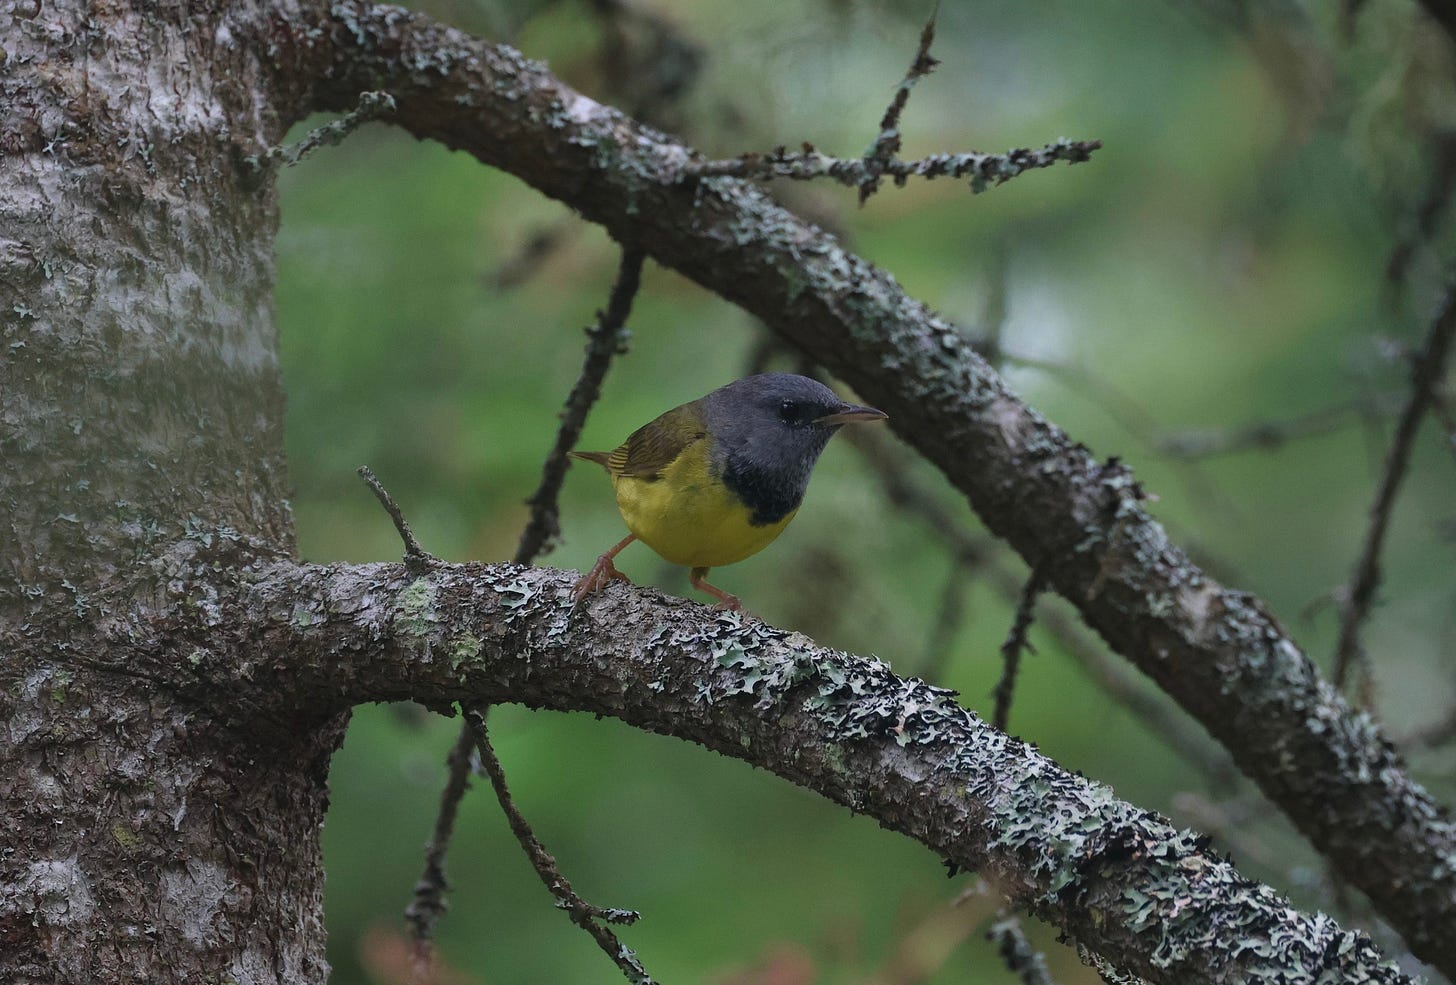 a gray-headed songbird with a yellow body and black breast standing on the lower of two lichen-covered branches on a tree. the bird is facing right, the tree is cut off at the left edge of the image. the background is blurry forest green.